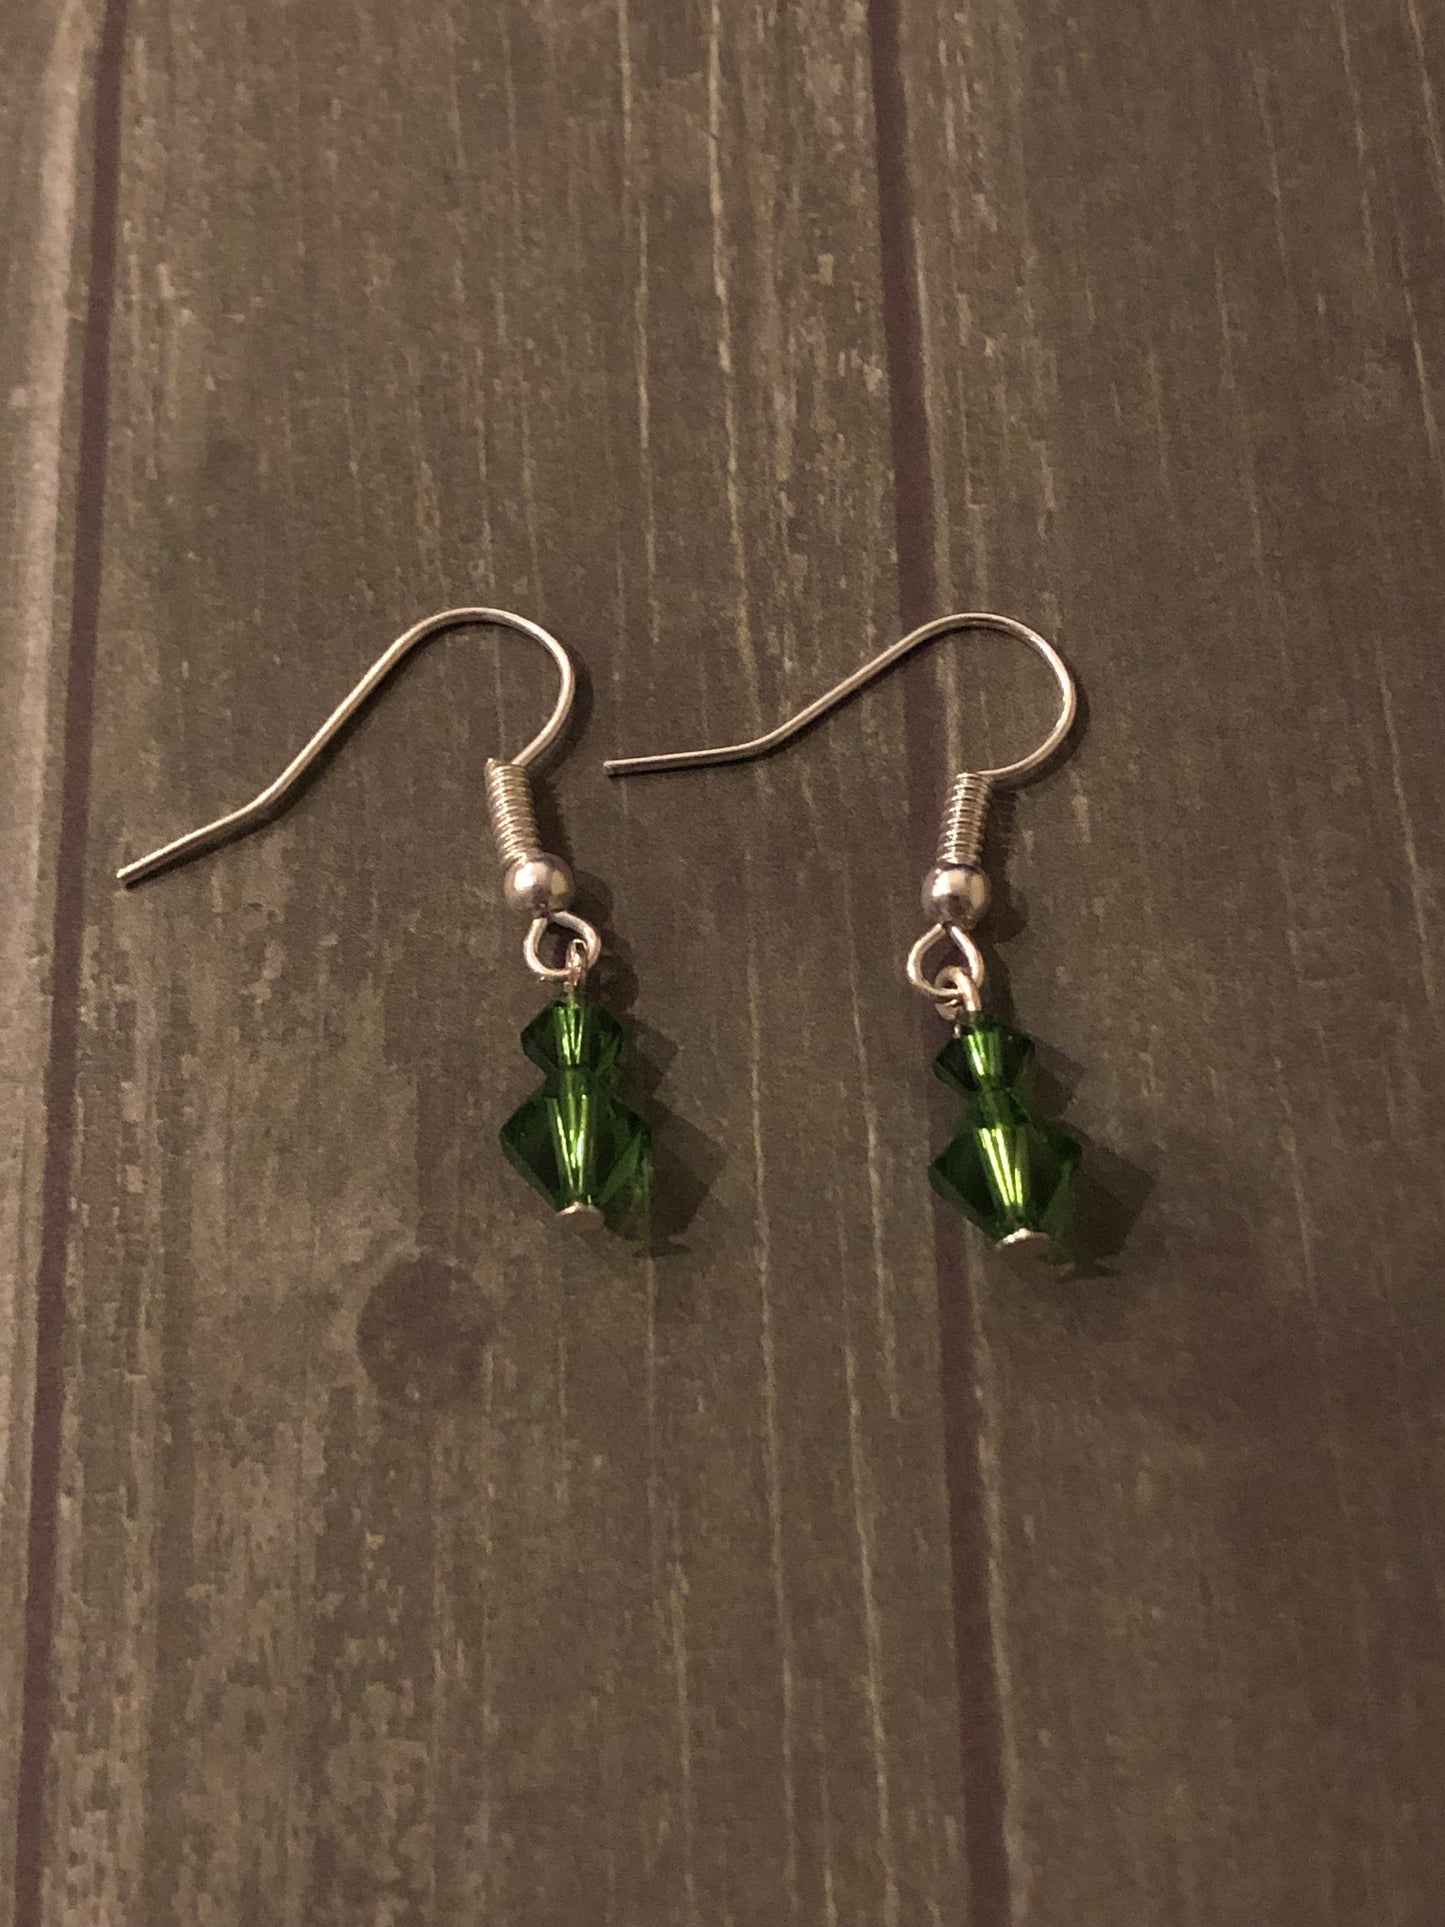 Silver earrings with 2 green crystal beads incorporated into the styling.